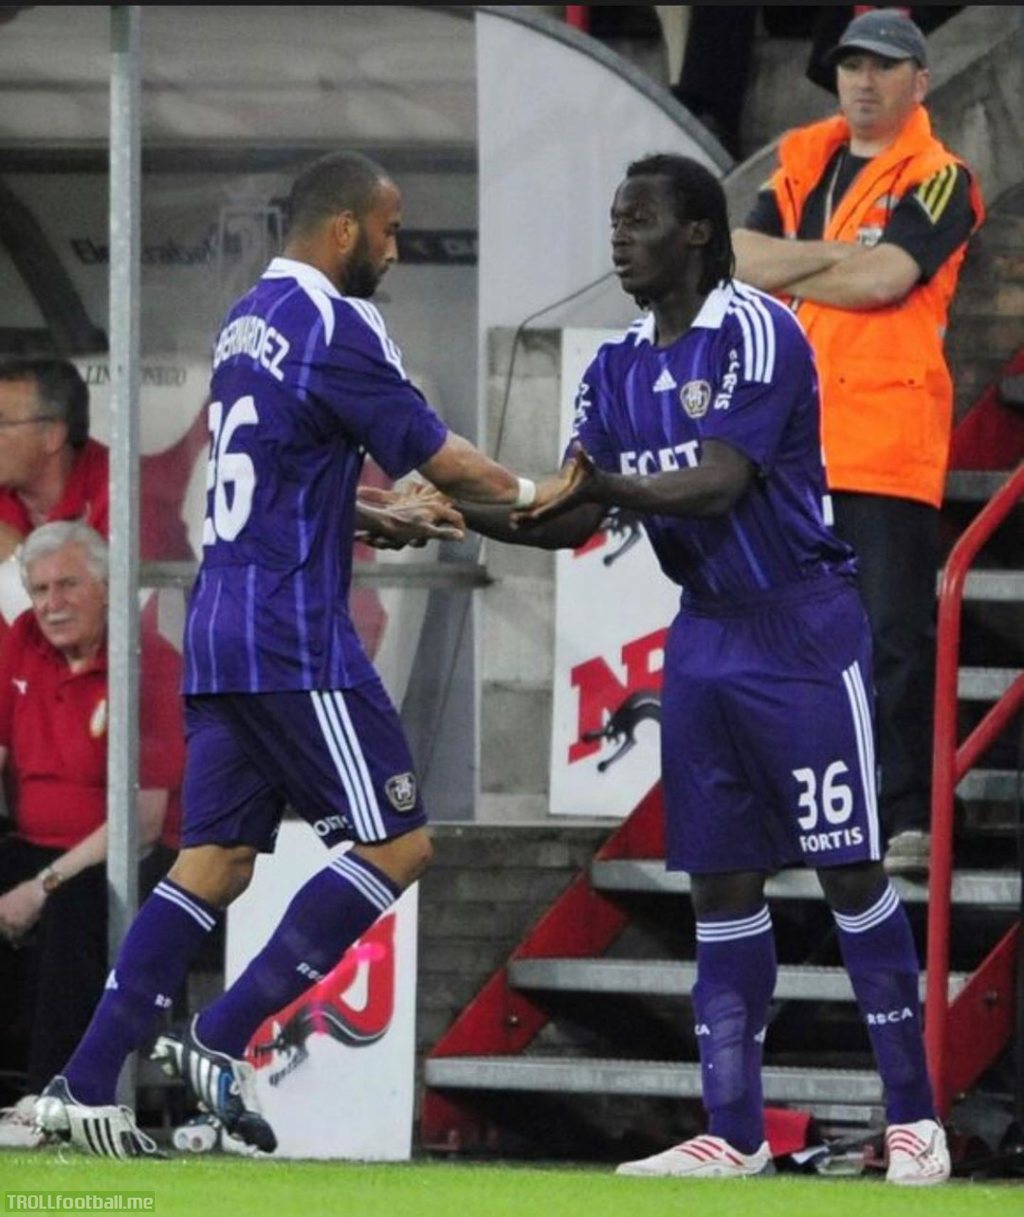 10 years ago today Romelu Lukaku made his pro debut at Anderlecht, 11 days after his 16th birthday.